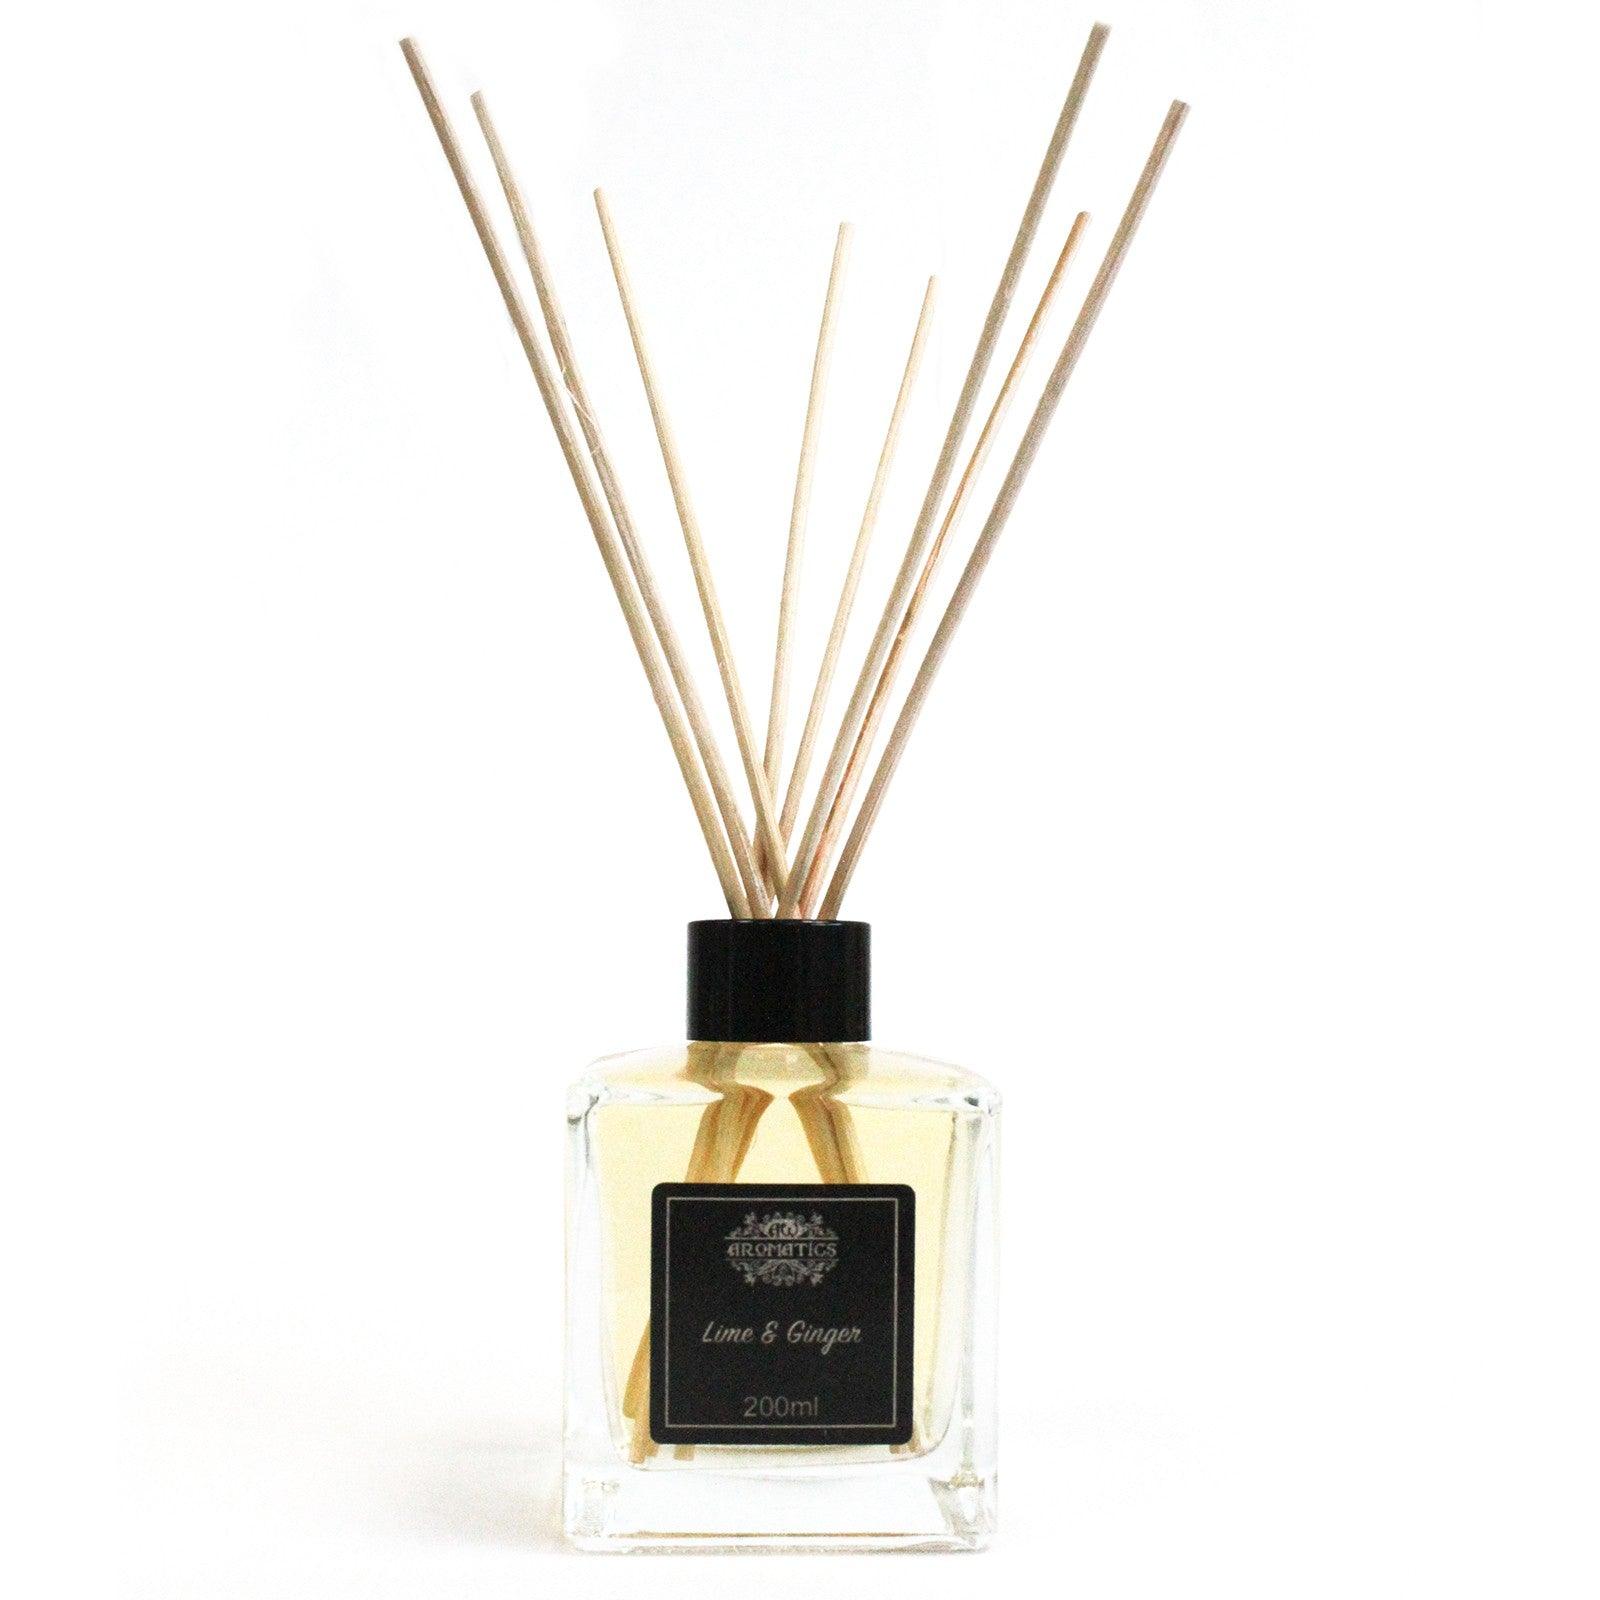 200ml Lime & Ginger Essential Oil Reed Diffuser - Charming Spaces